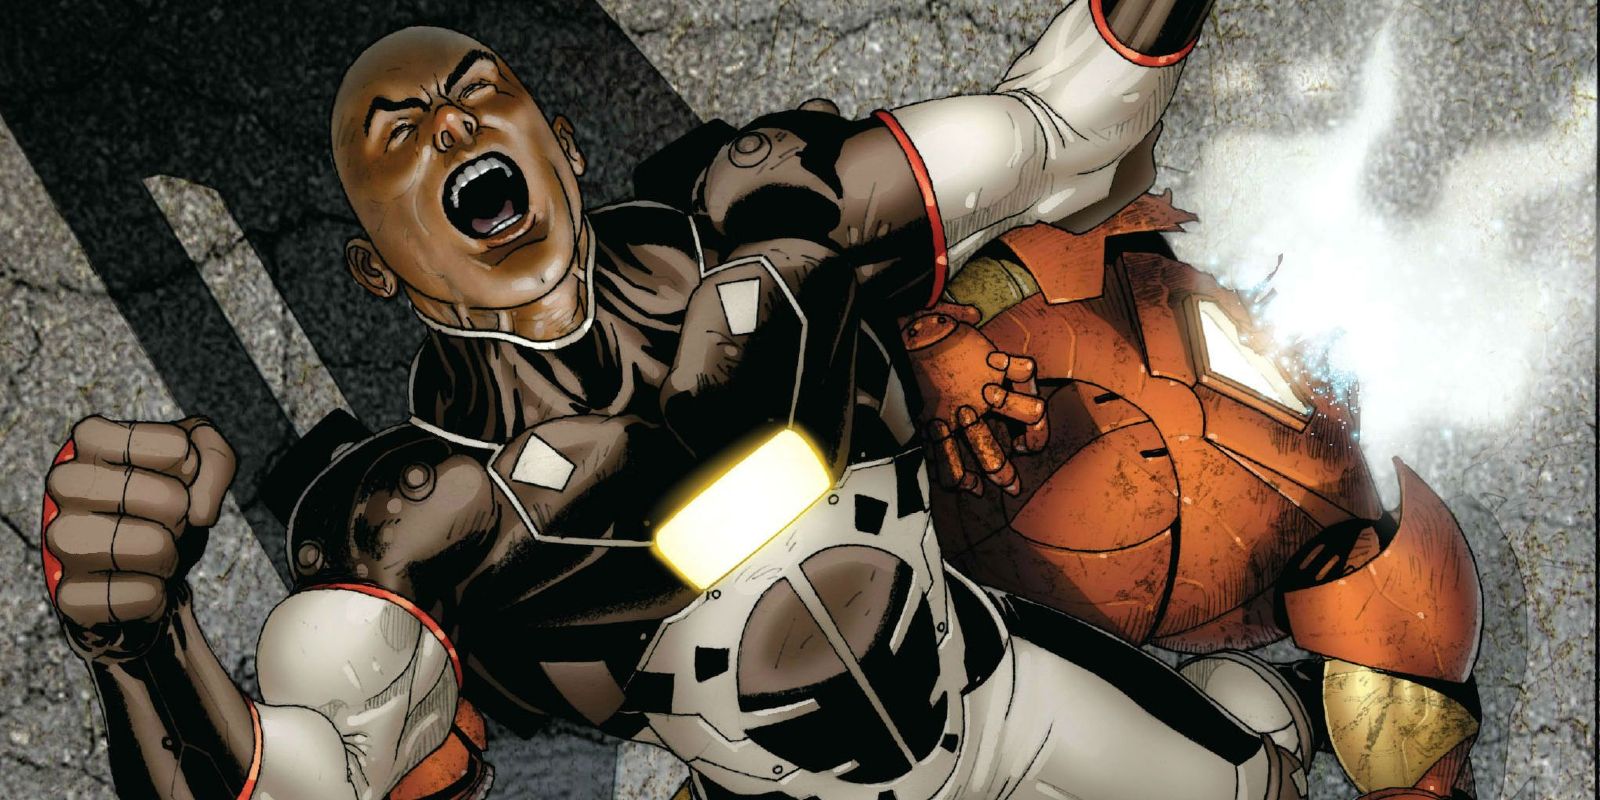 Ezekial Stane standing over a destroyed Iron Man suit in Marvel comics